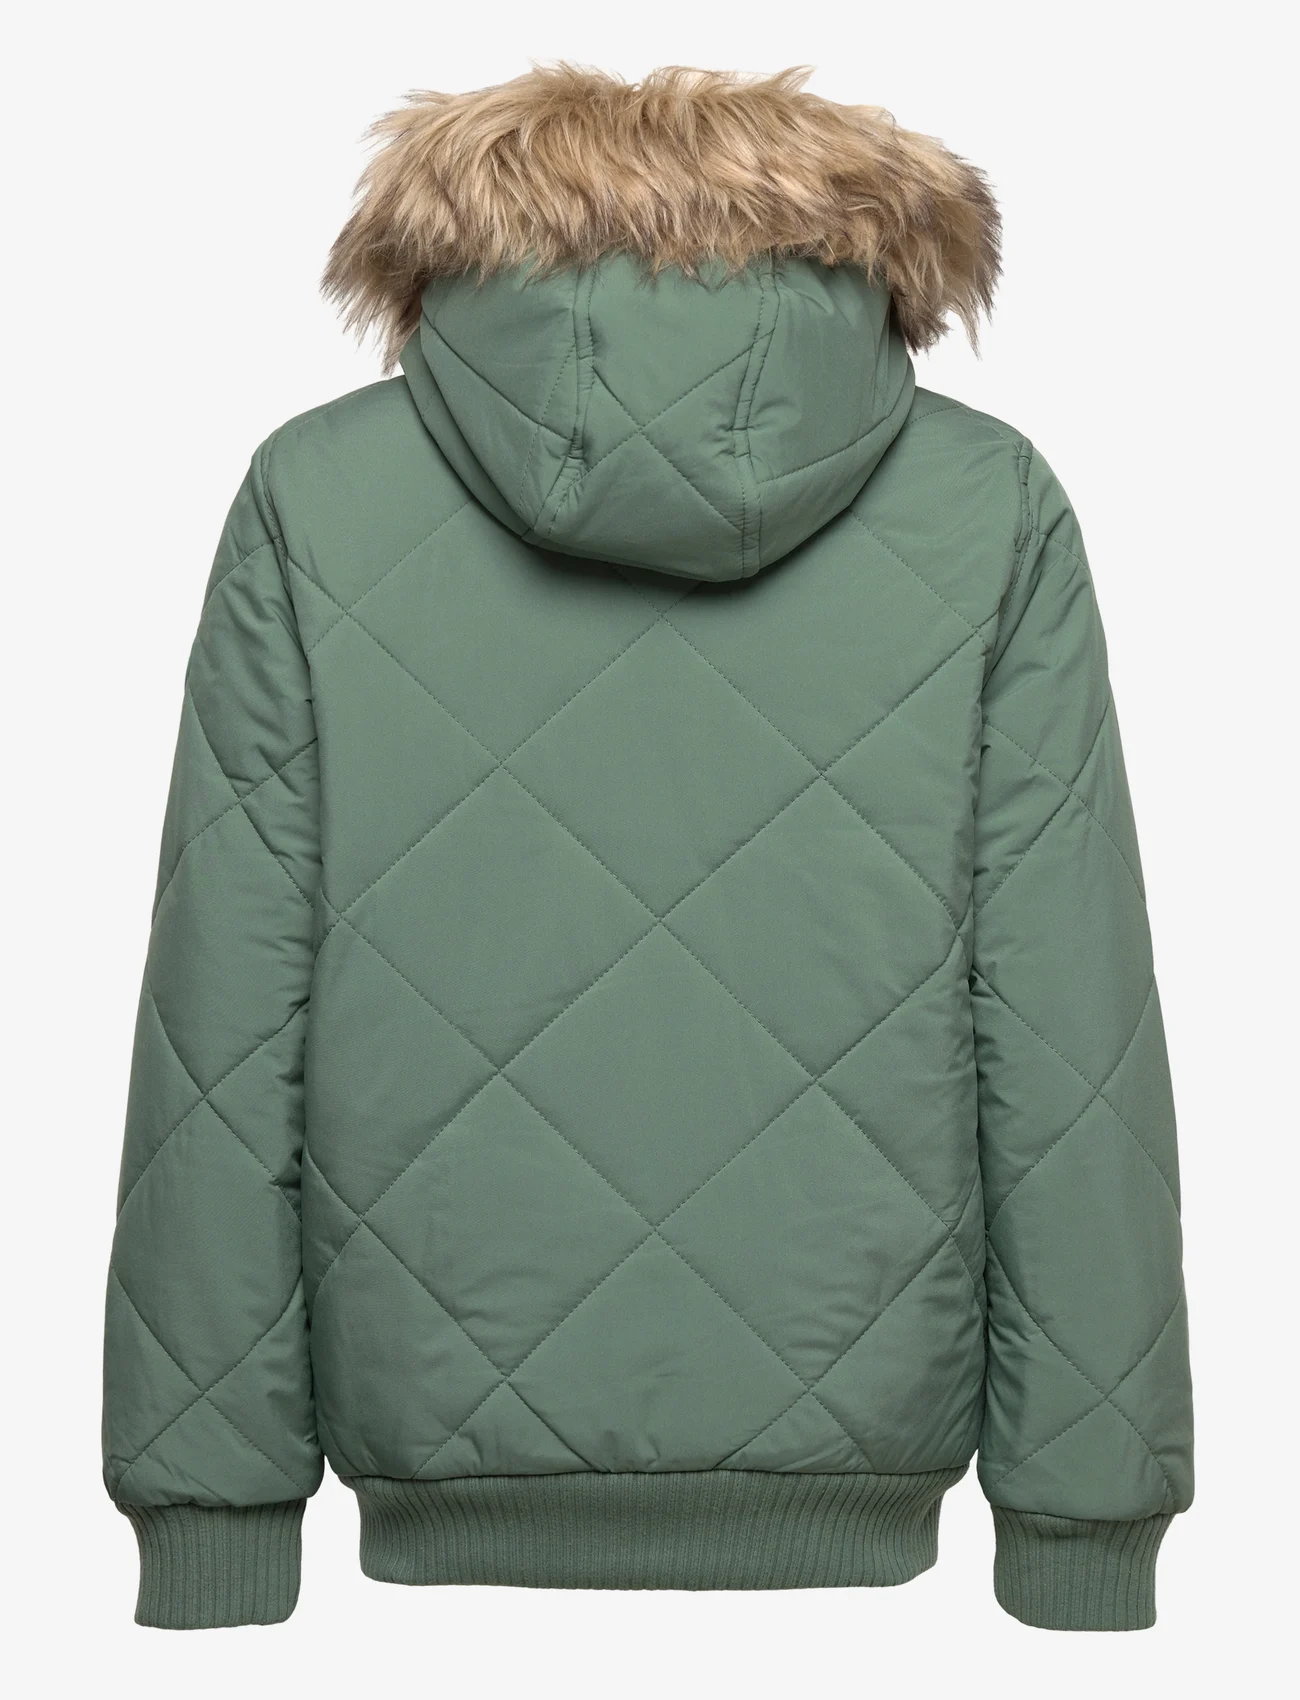 Abercrombie & Fitch - kids GIRLS OUTERWEAR - puffer & padded - green - 1